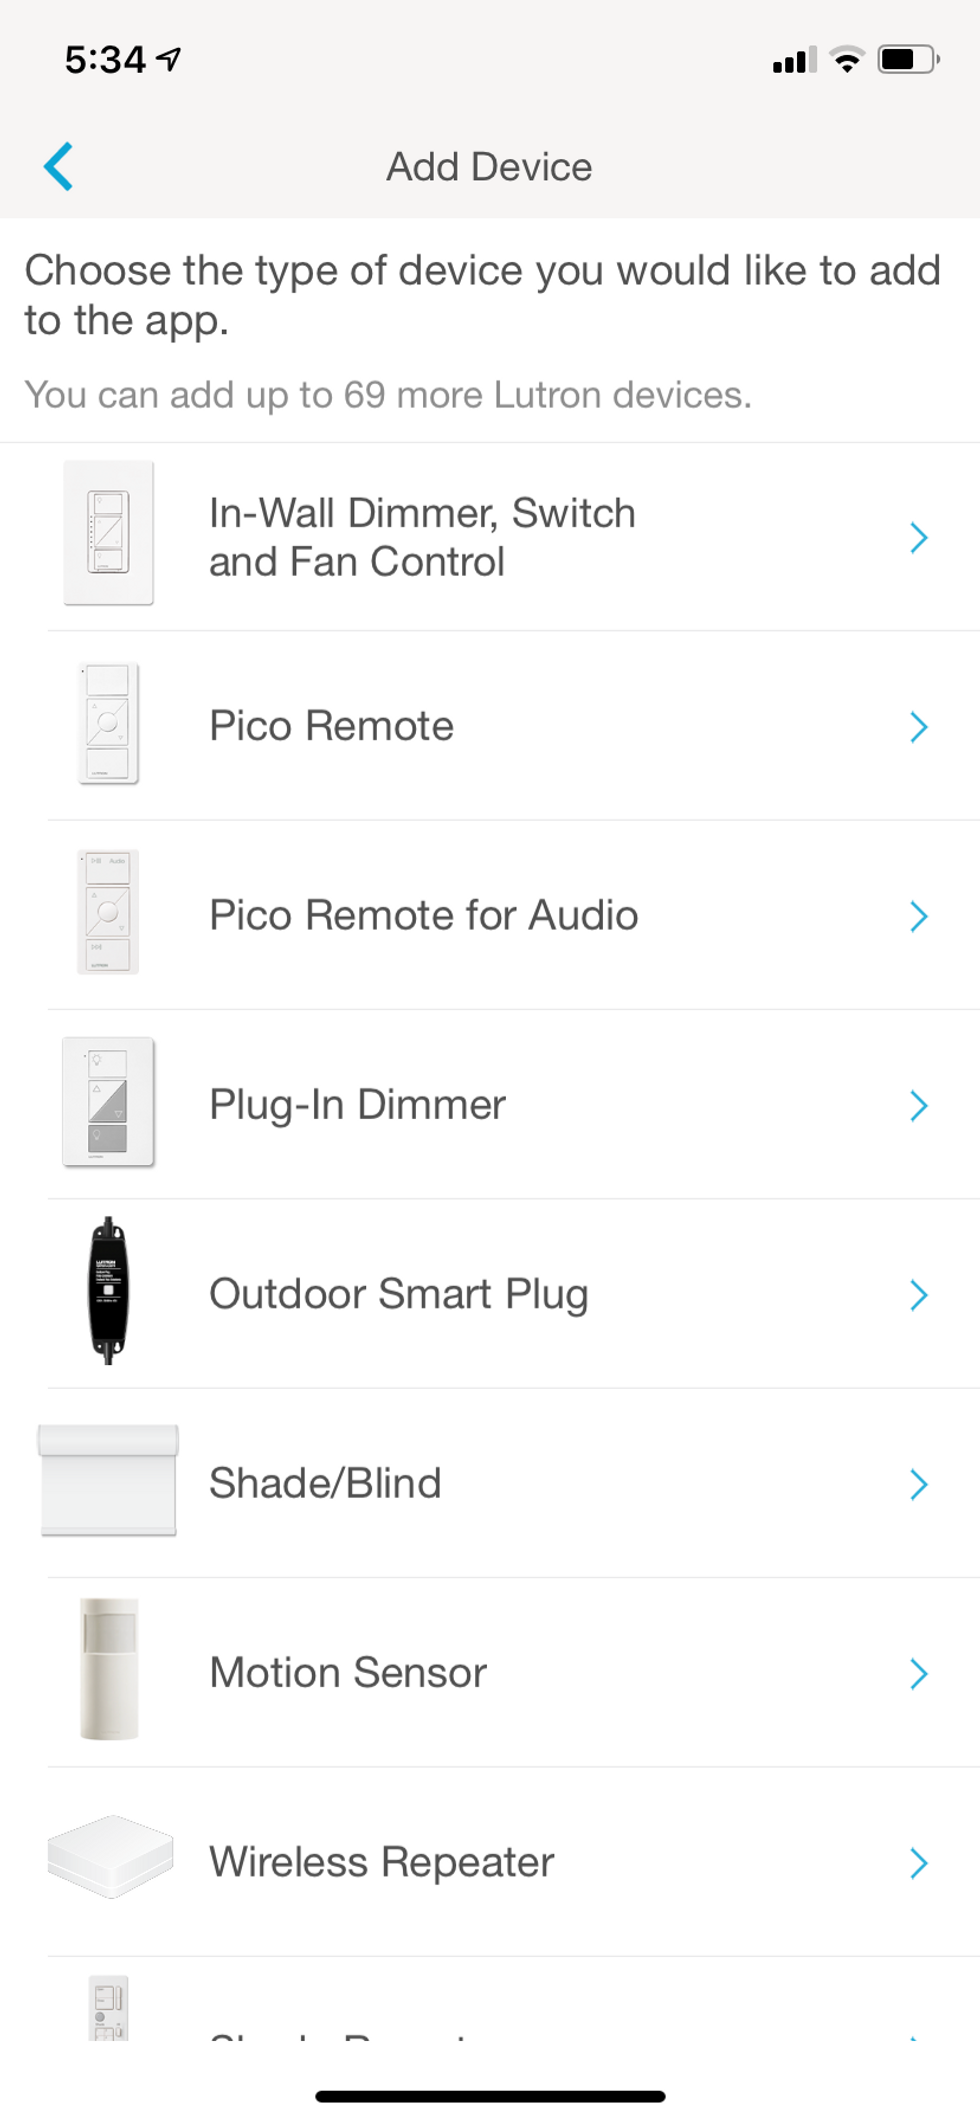 Lutron mobile app home page for add a device.